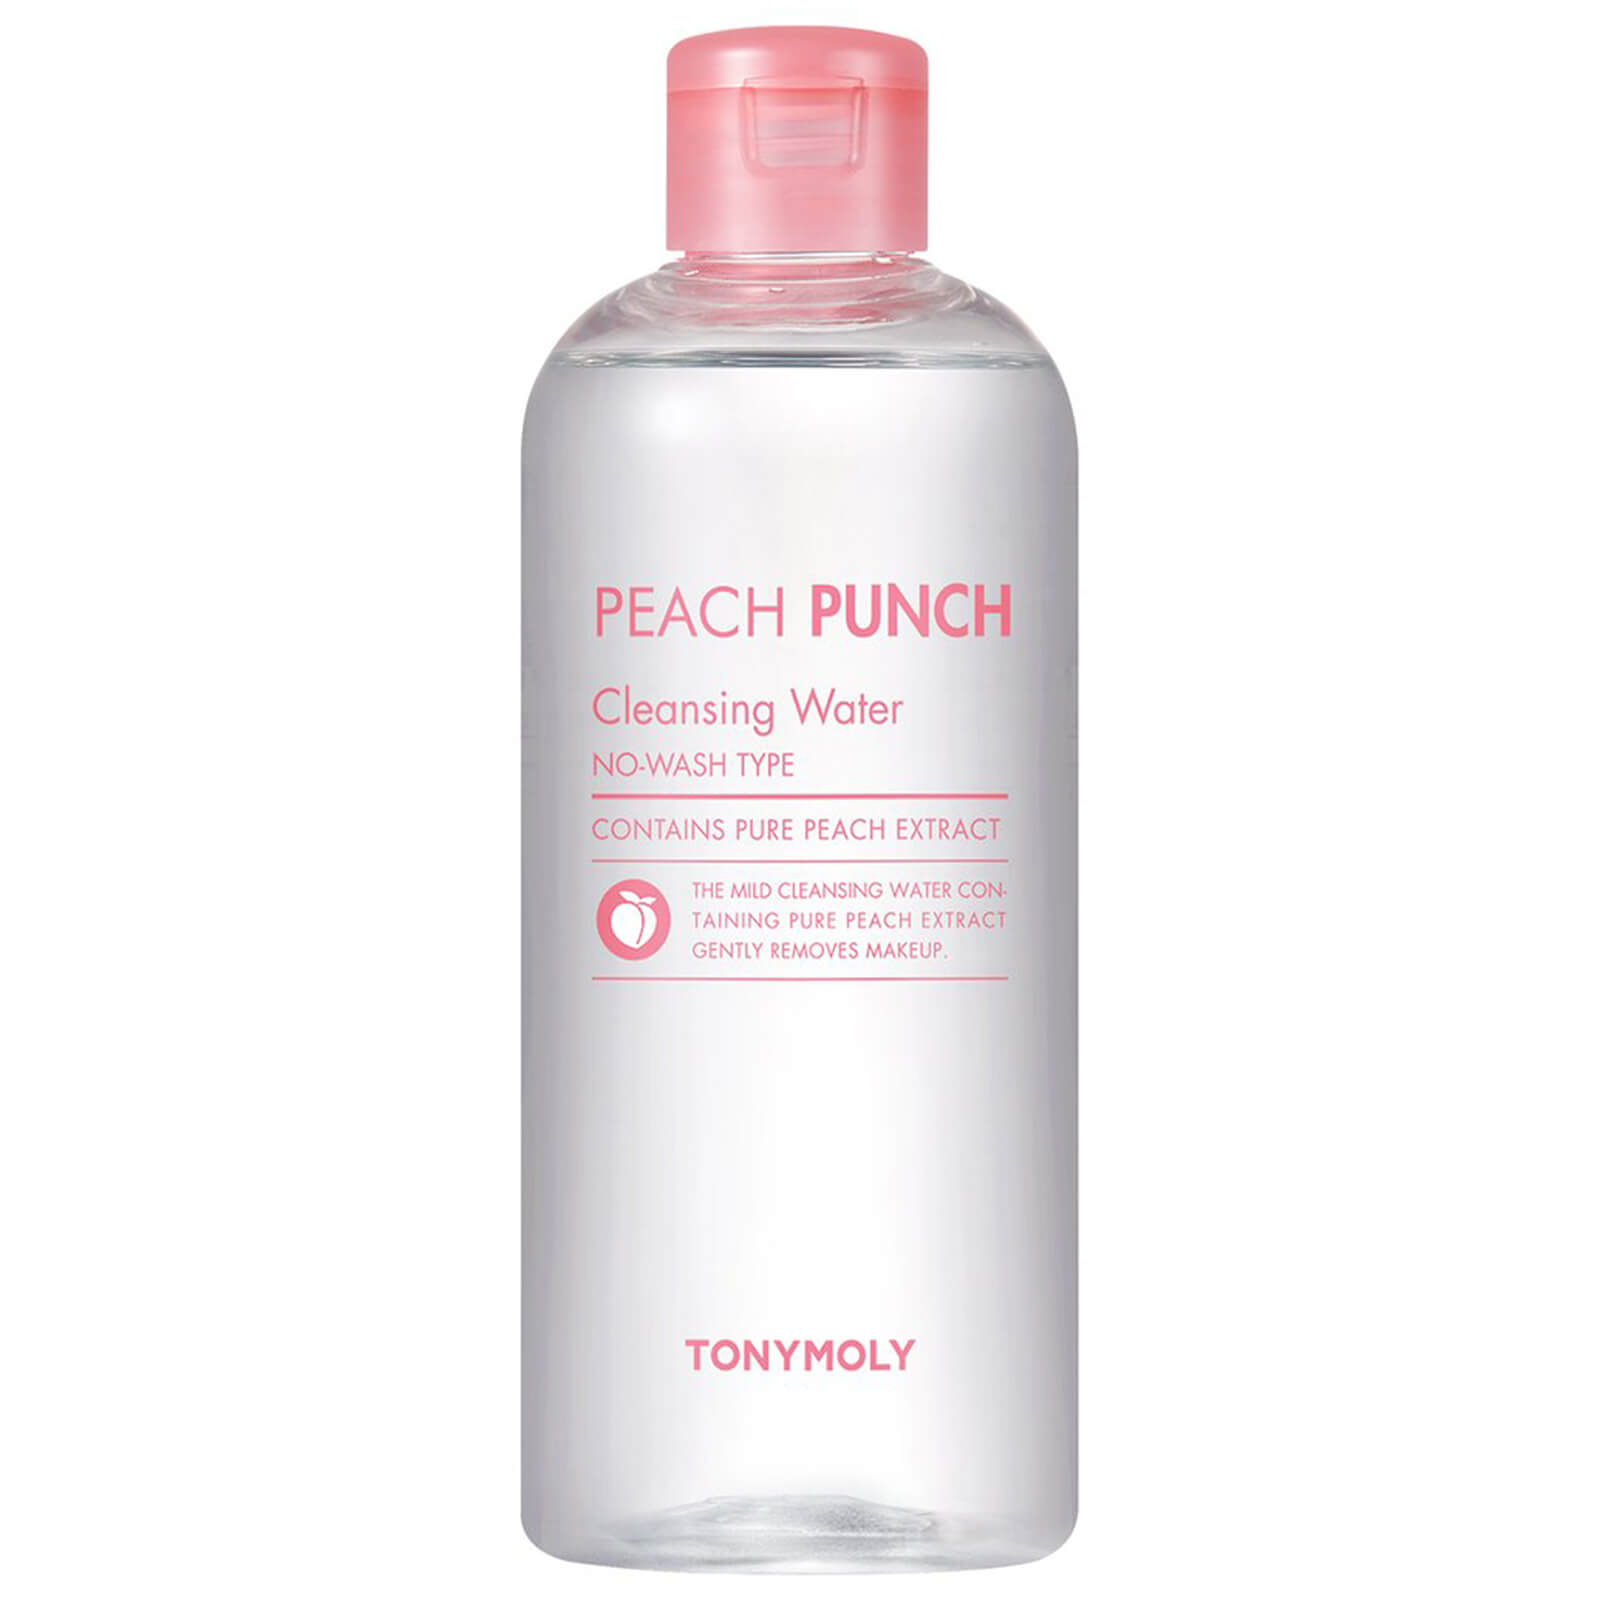 TONYMOLY Peach Punch Cleansing Water 300ml